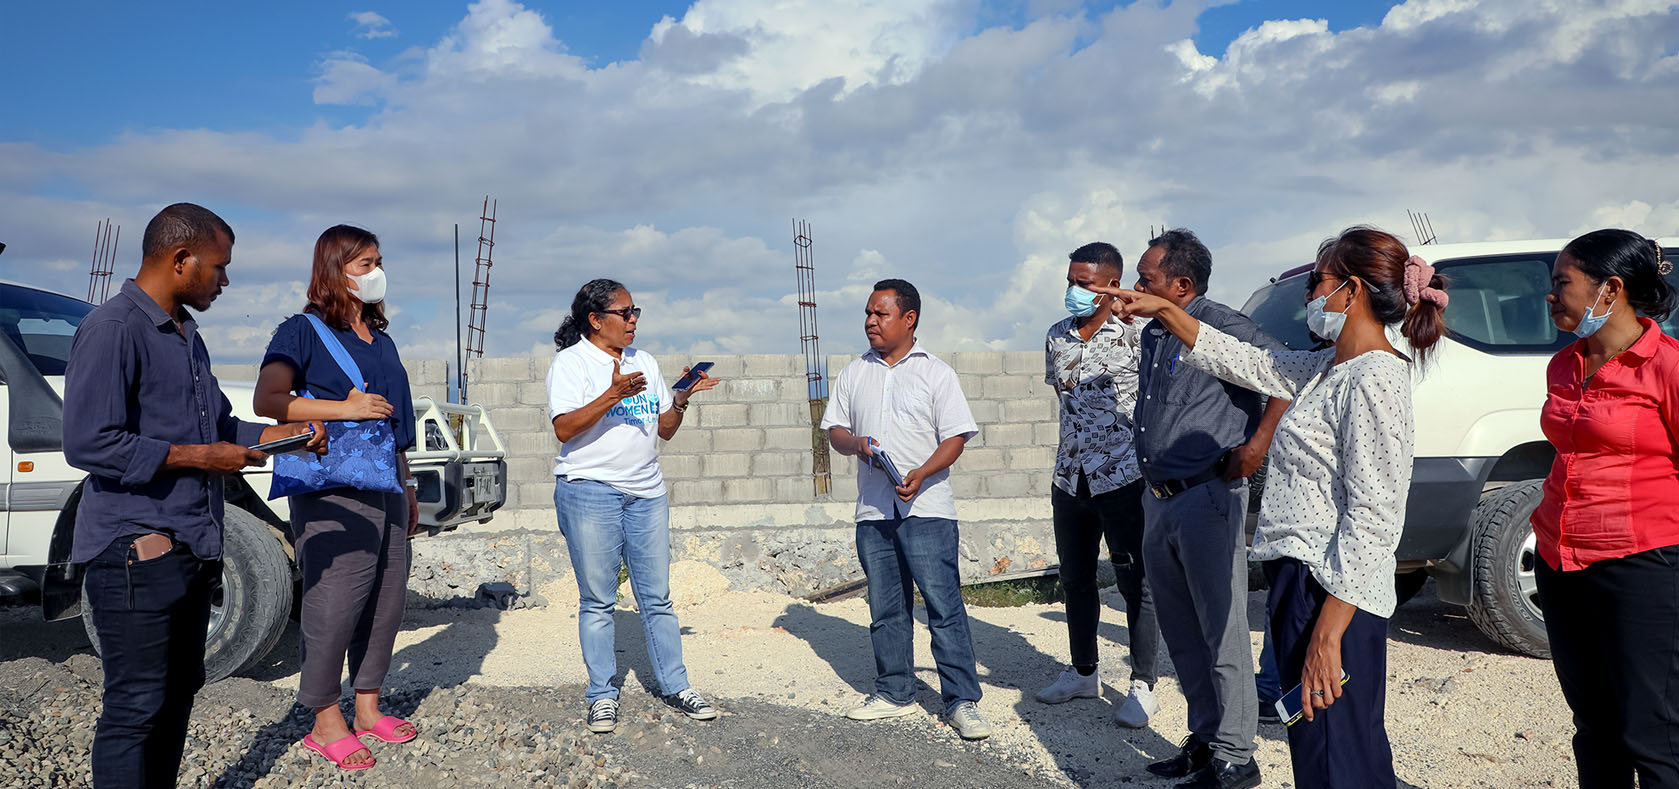 Representatives of Baucau Municipal Authority, the State Secretary for Equality and Inclusion, UN Women and TOMAK on 29 April 2022 inspect the new Baucau Central Market being built in Baucau city in Timor-Leste. Photo: UN Women/Helio Miguel